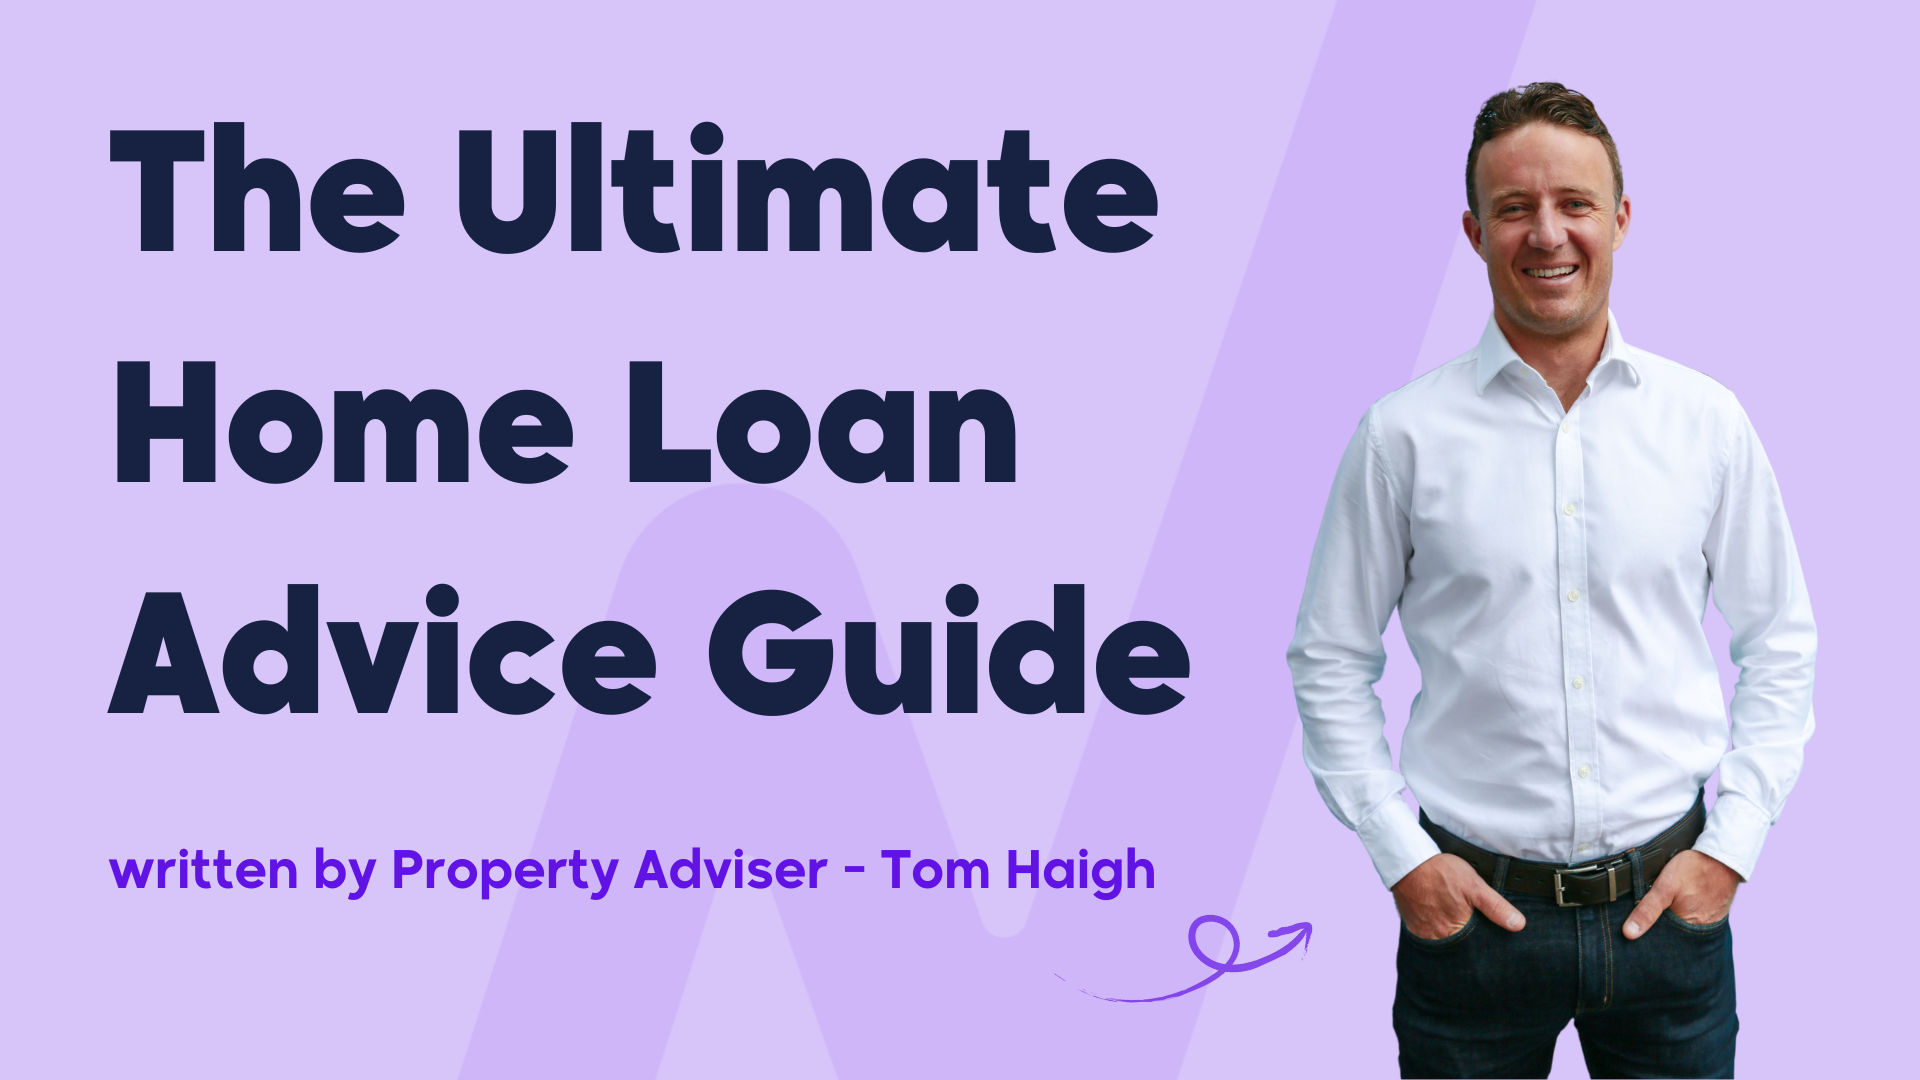 The Ultimate Home Loan Advice Guide